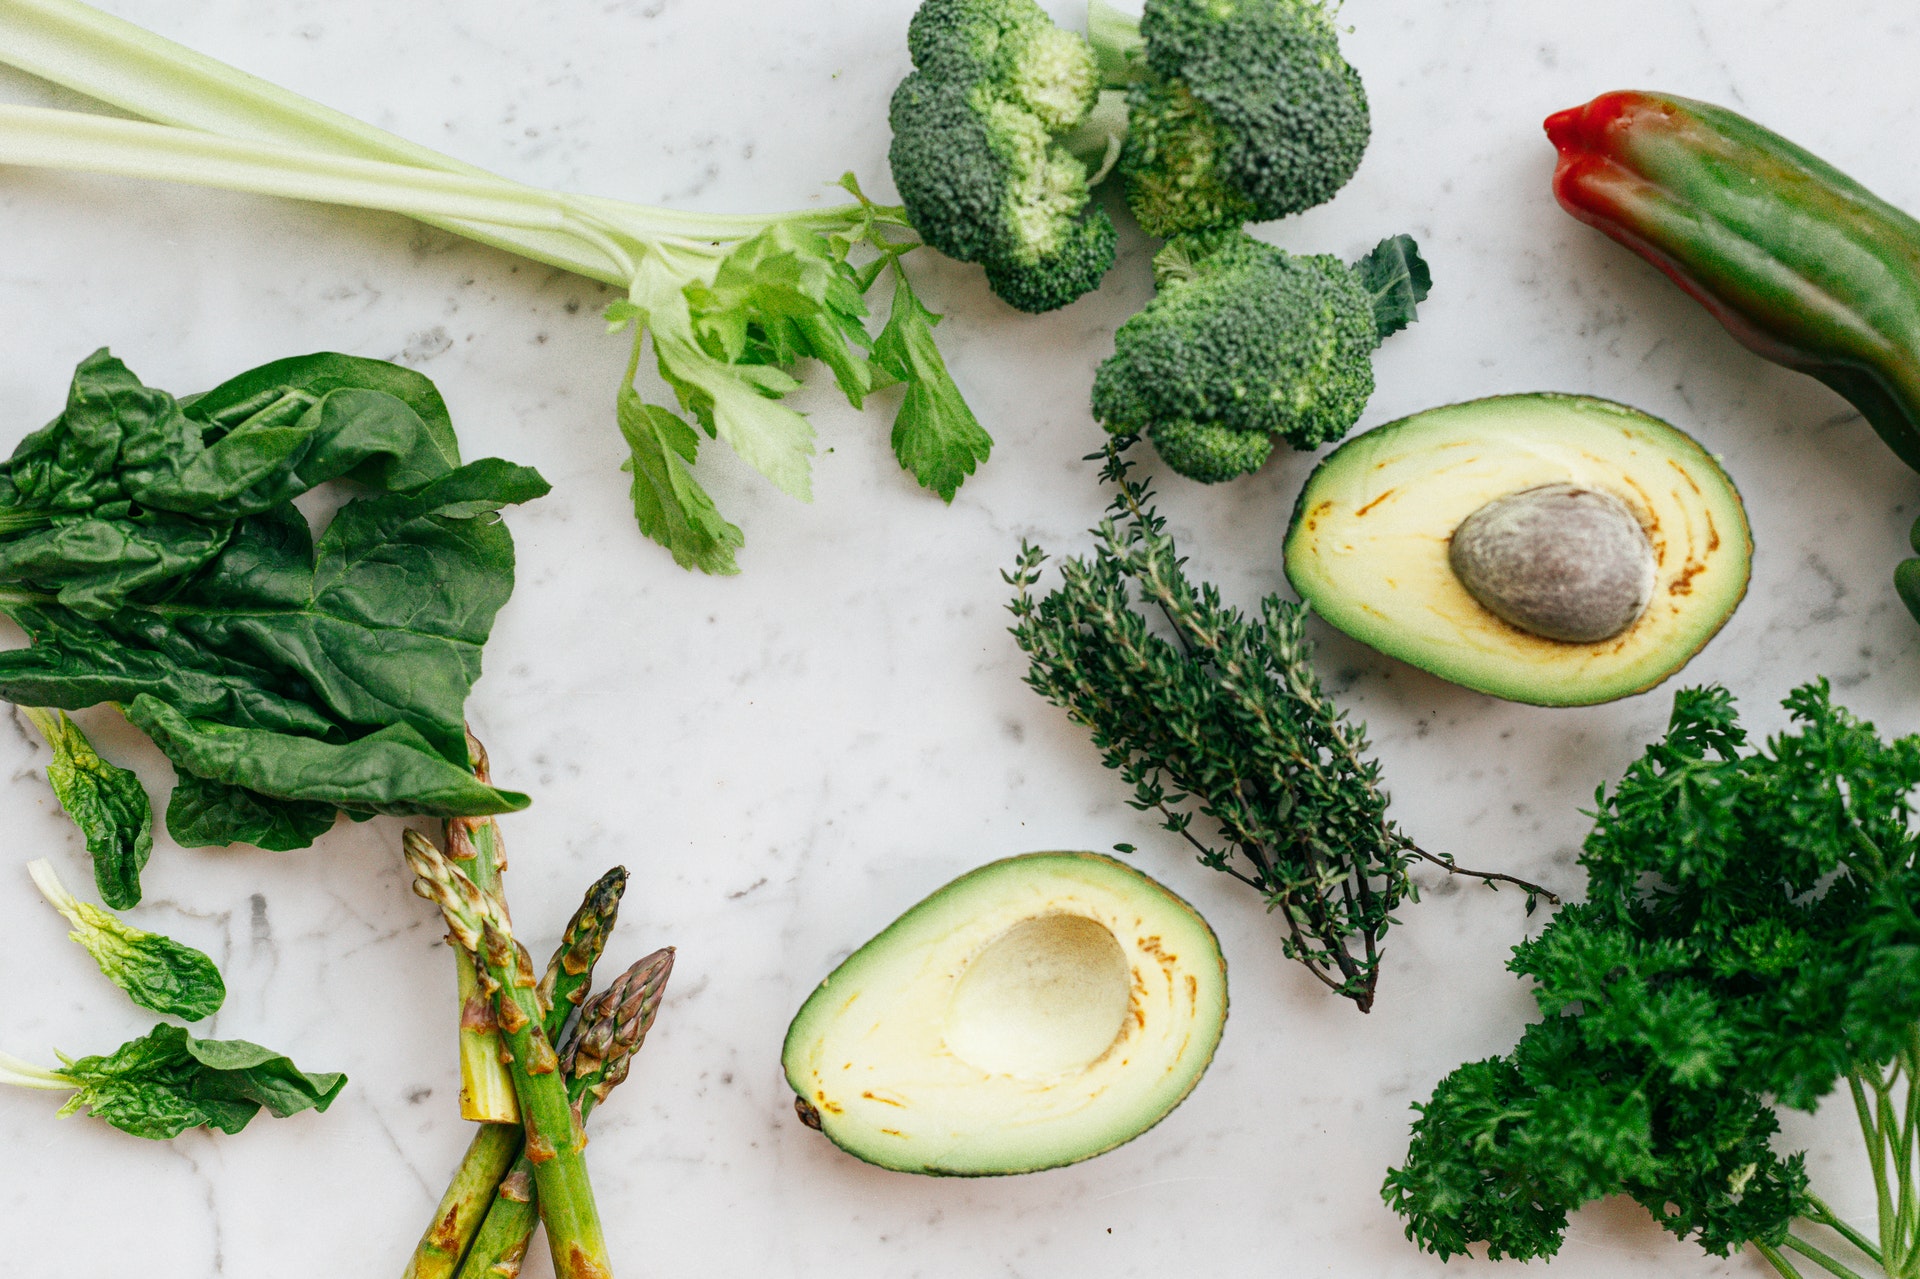 Food sources of folate (vitamin b9) — spinach, broccoli, and avocados